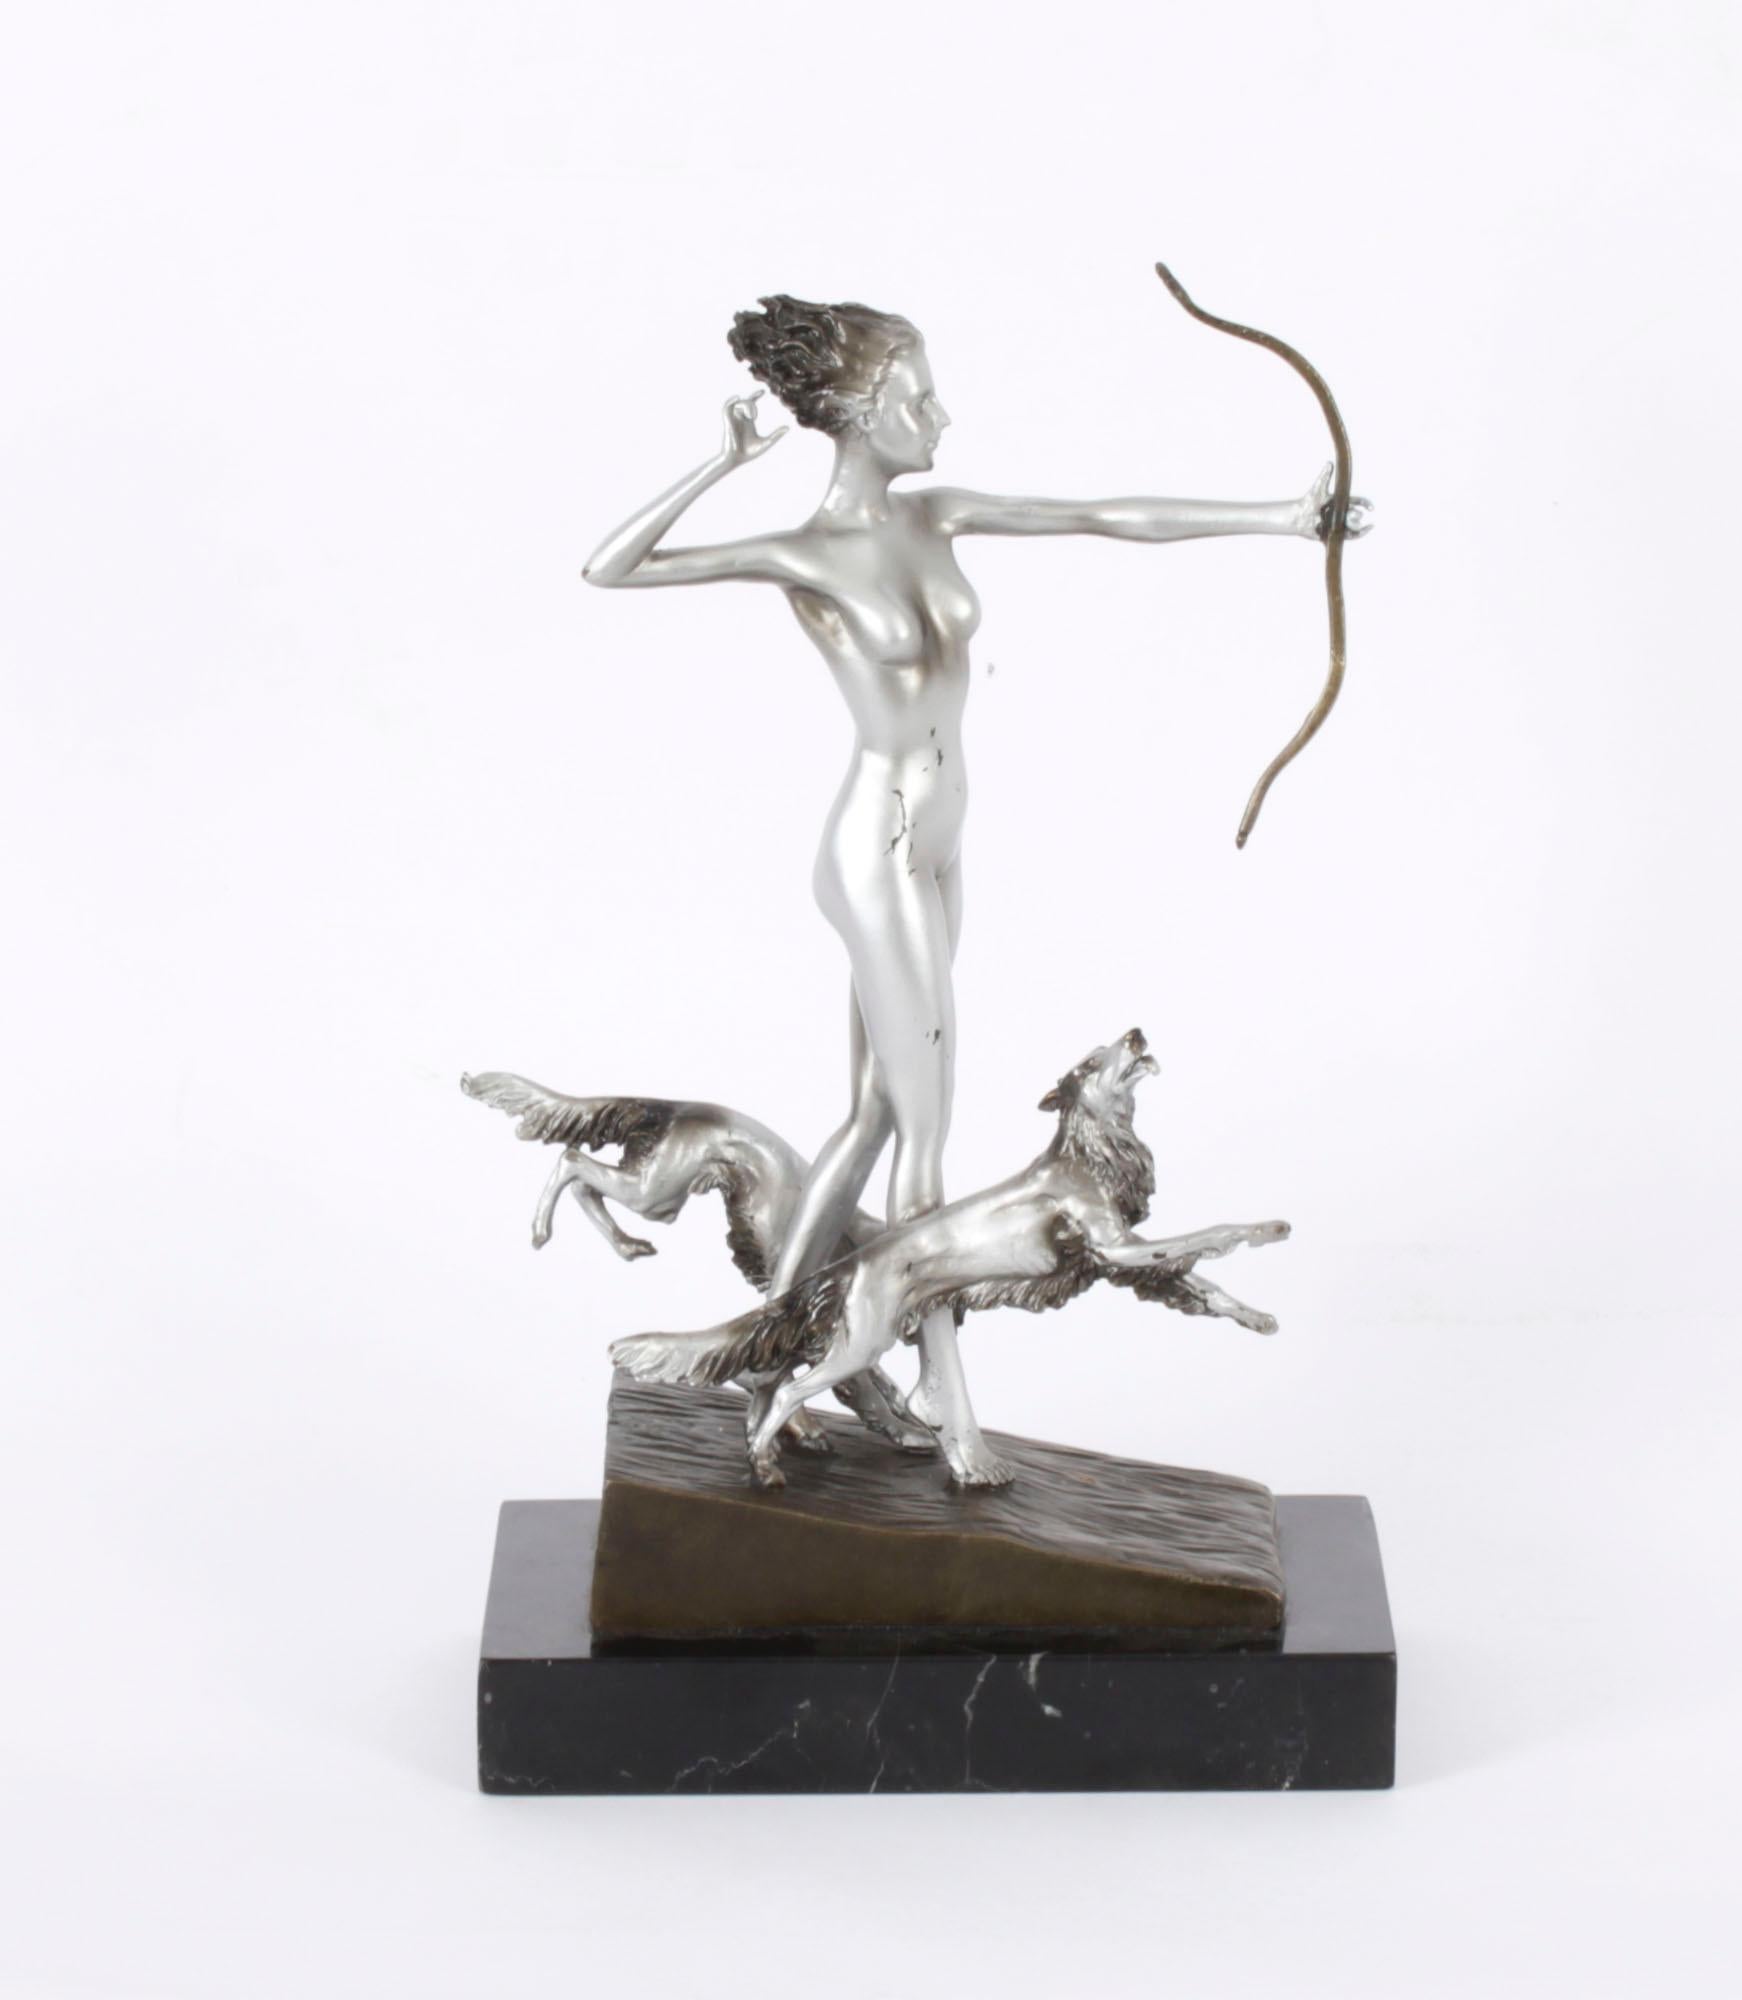 A beautiful Art Deco Revival sculpture of Diana the Huntress with Hounds, after Josef Lorenzl, dating from the 20th Century.

The decorative sculpture of silvered cast-bronze features a naked Diana the Huntress, with bow and a pair of hunting dogs,